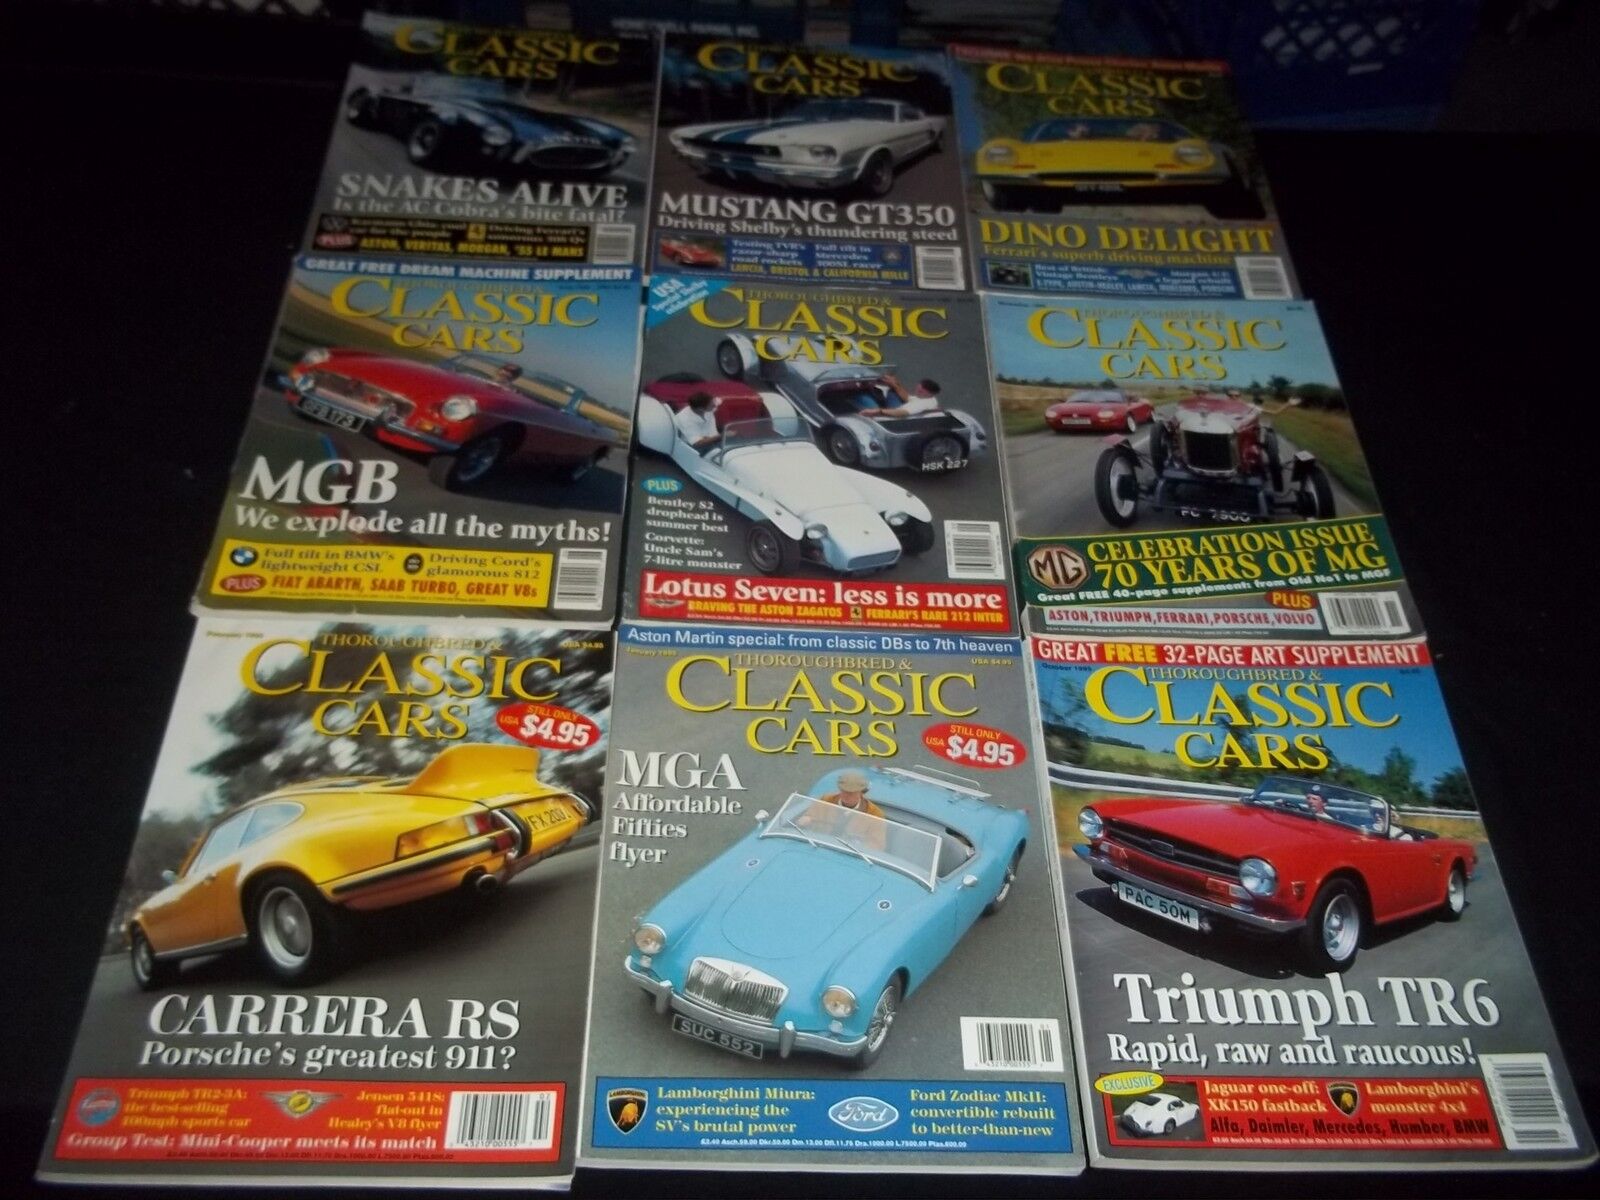 1995 THOROUGHBRED & CLASSIC CARS MAGAZINE LOT OF 9 ISSUES - NICE COVERS - M 547